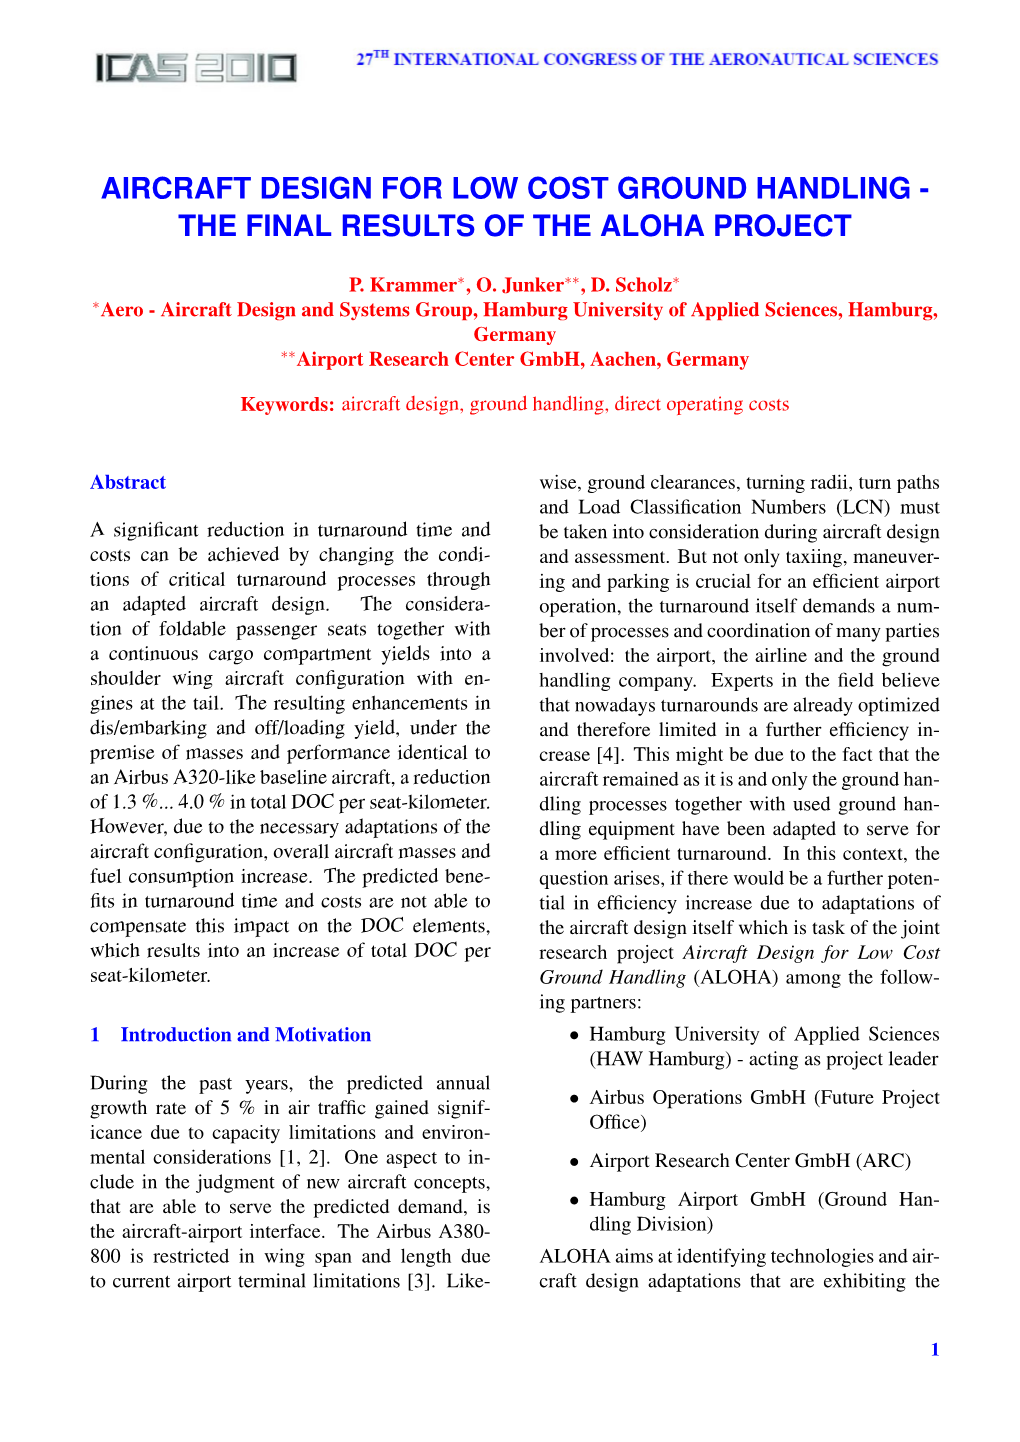 Aircraft Design for Low Cost Ground Handling - the Final Results of the Aloha Project